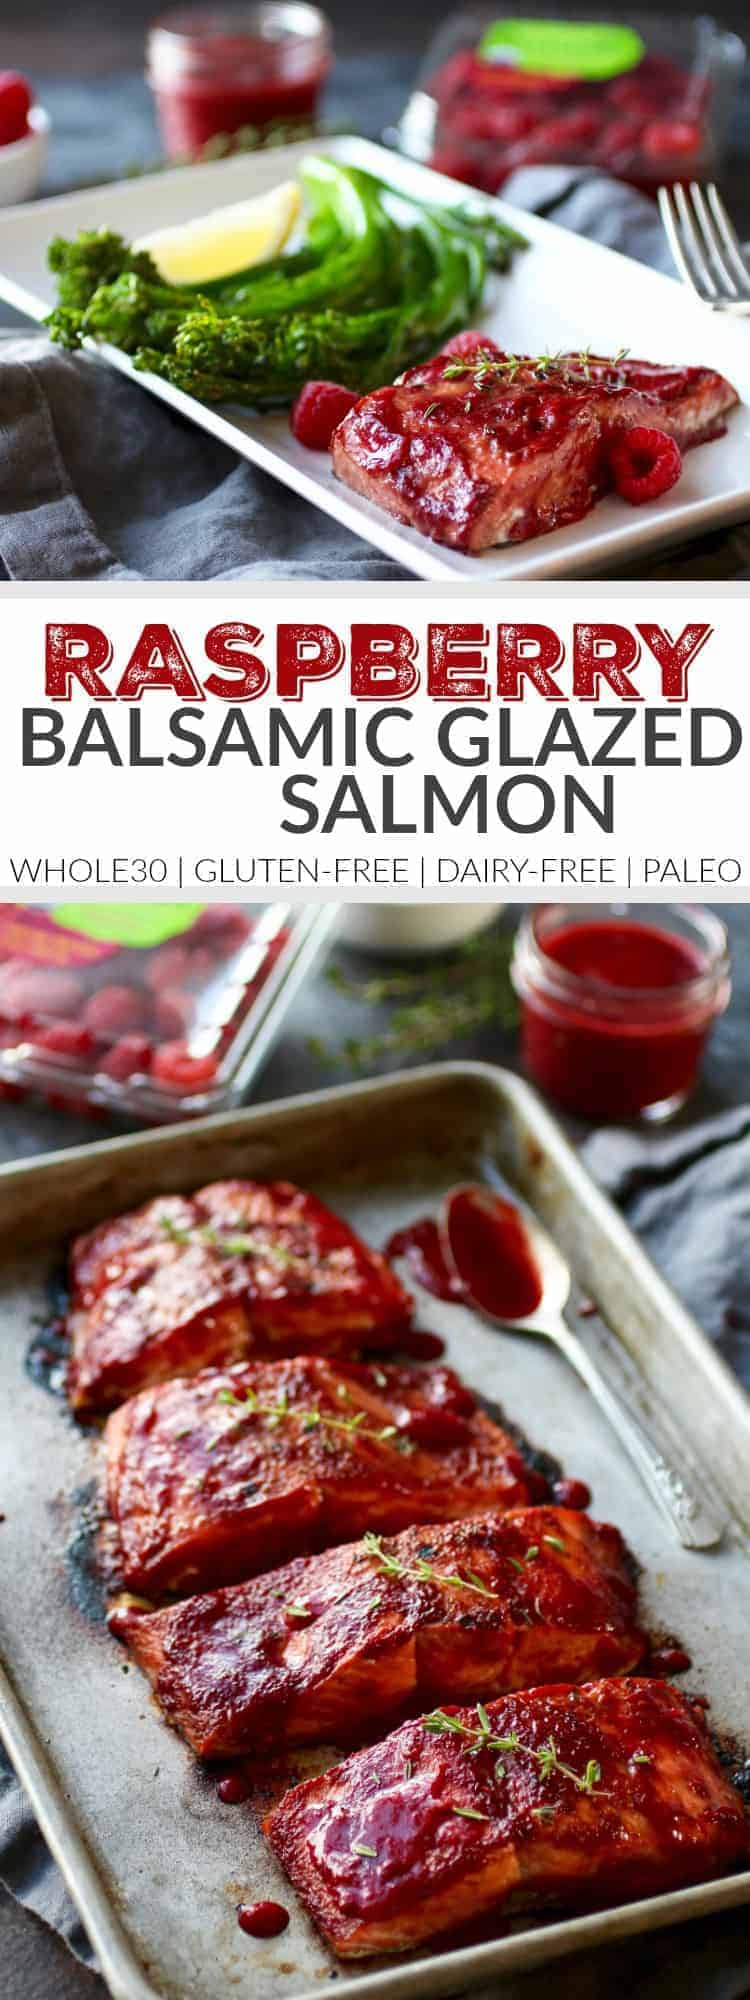 Raspberry Balsamic Glazed Salmon (Whole30) | The Real Food Dietitians | https://therealfooddietitians.com/raspberry-balsamic-glazed-salmon-whole30/